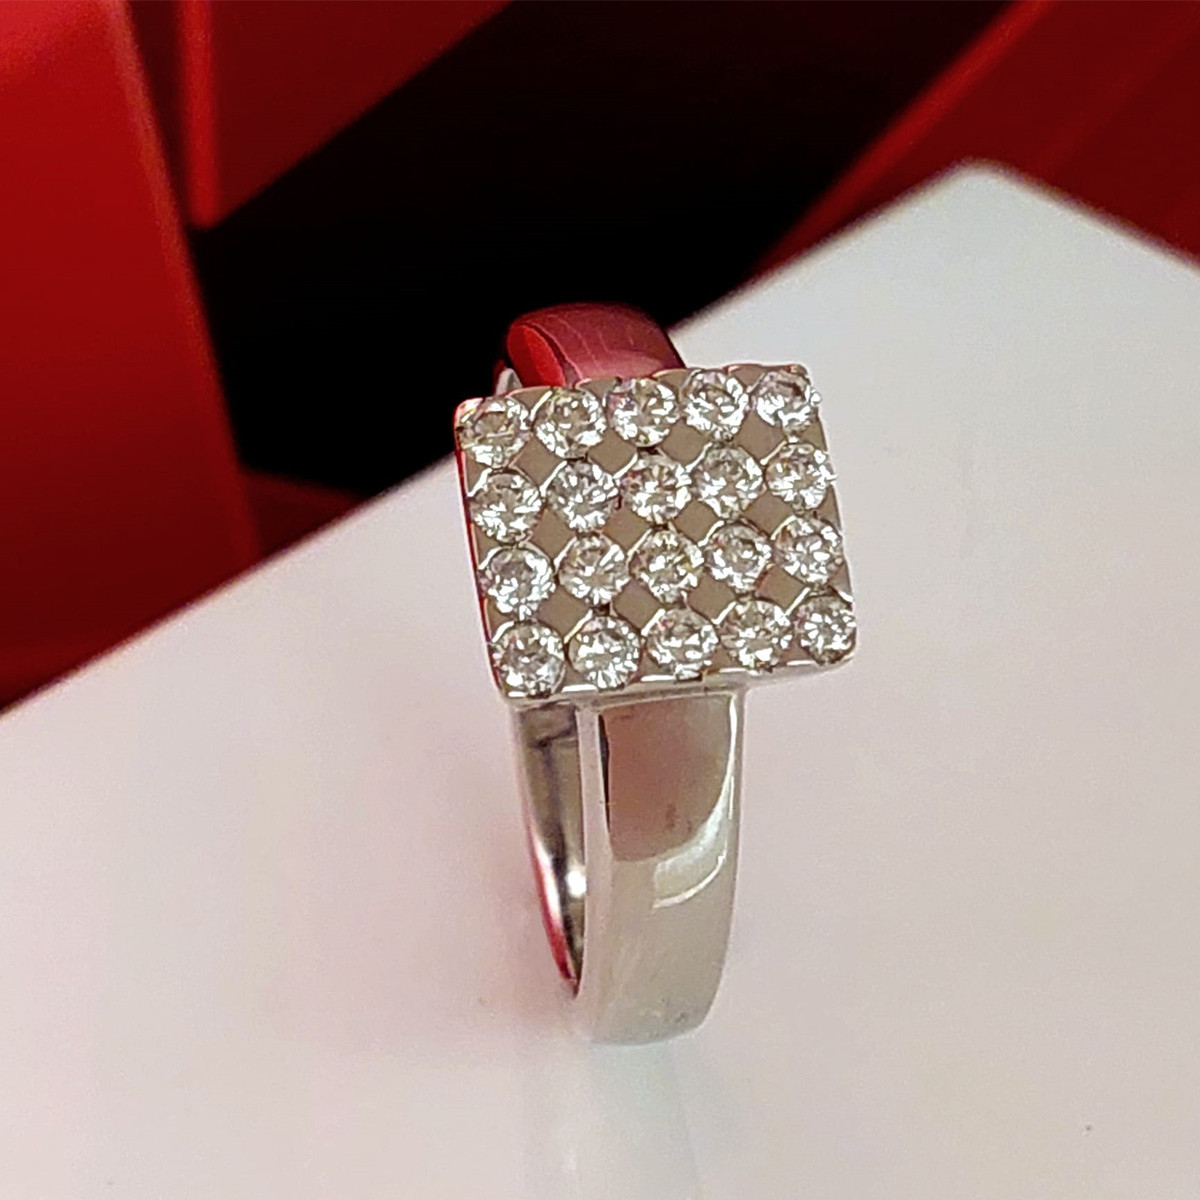 GOLD SEAL RING WITH 20 DIAMONDS